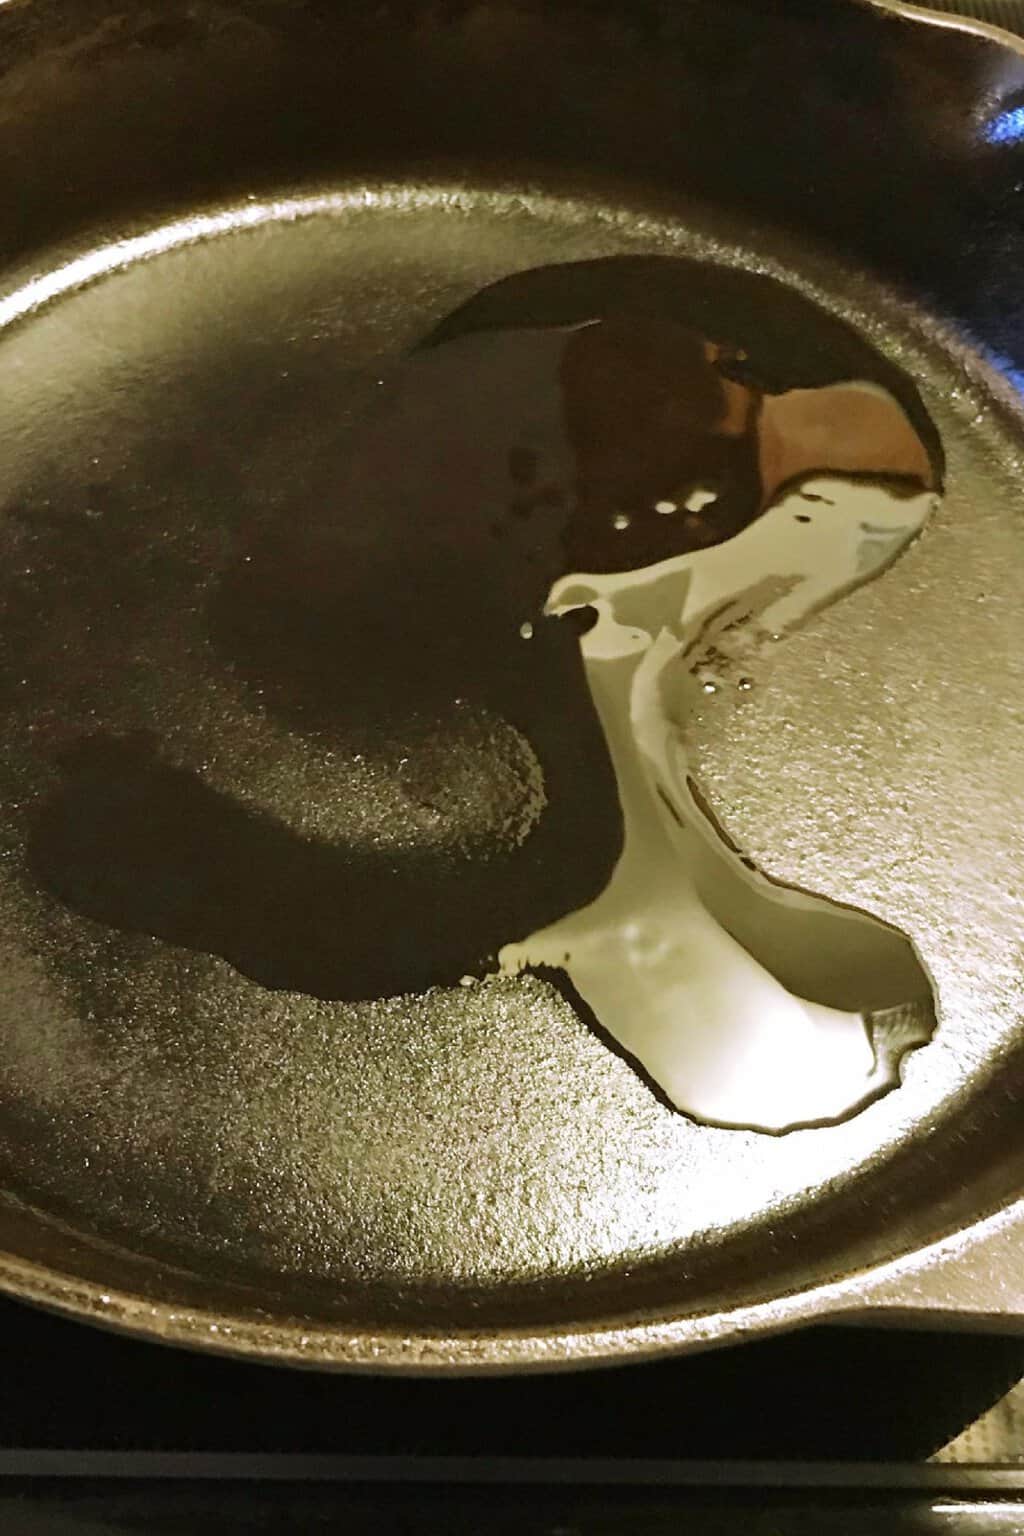 Oil on a skillet before cooking.